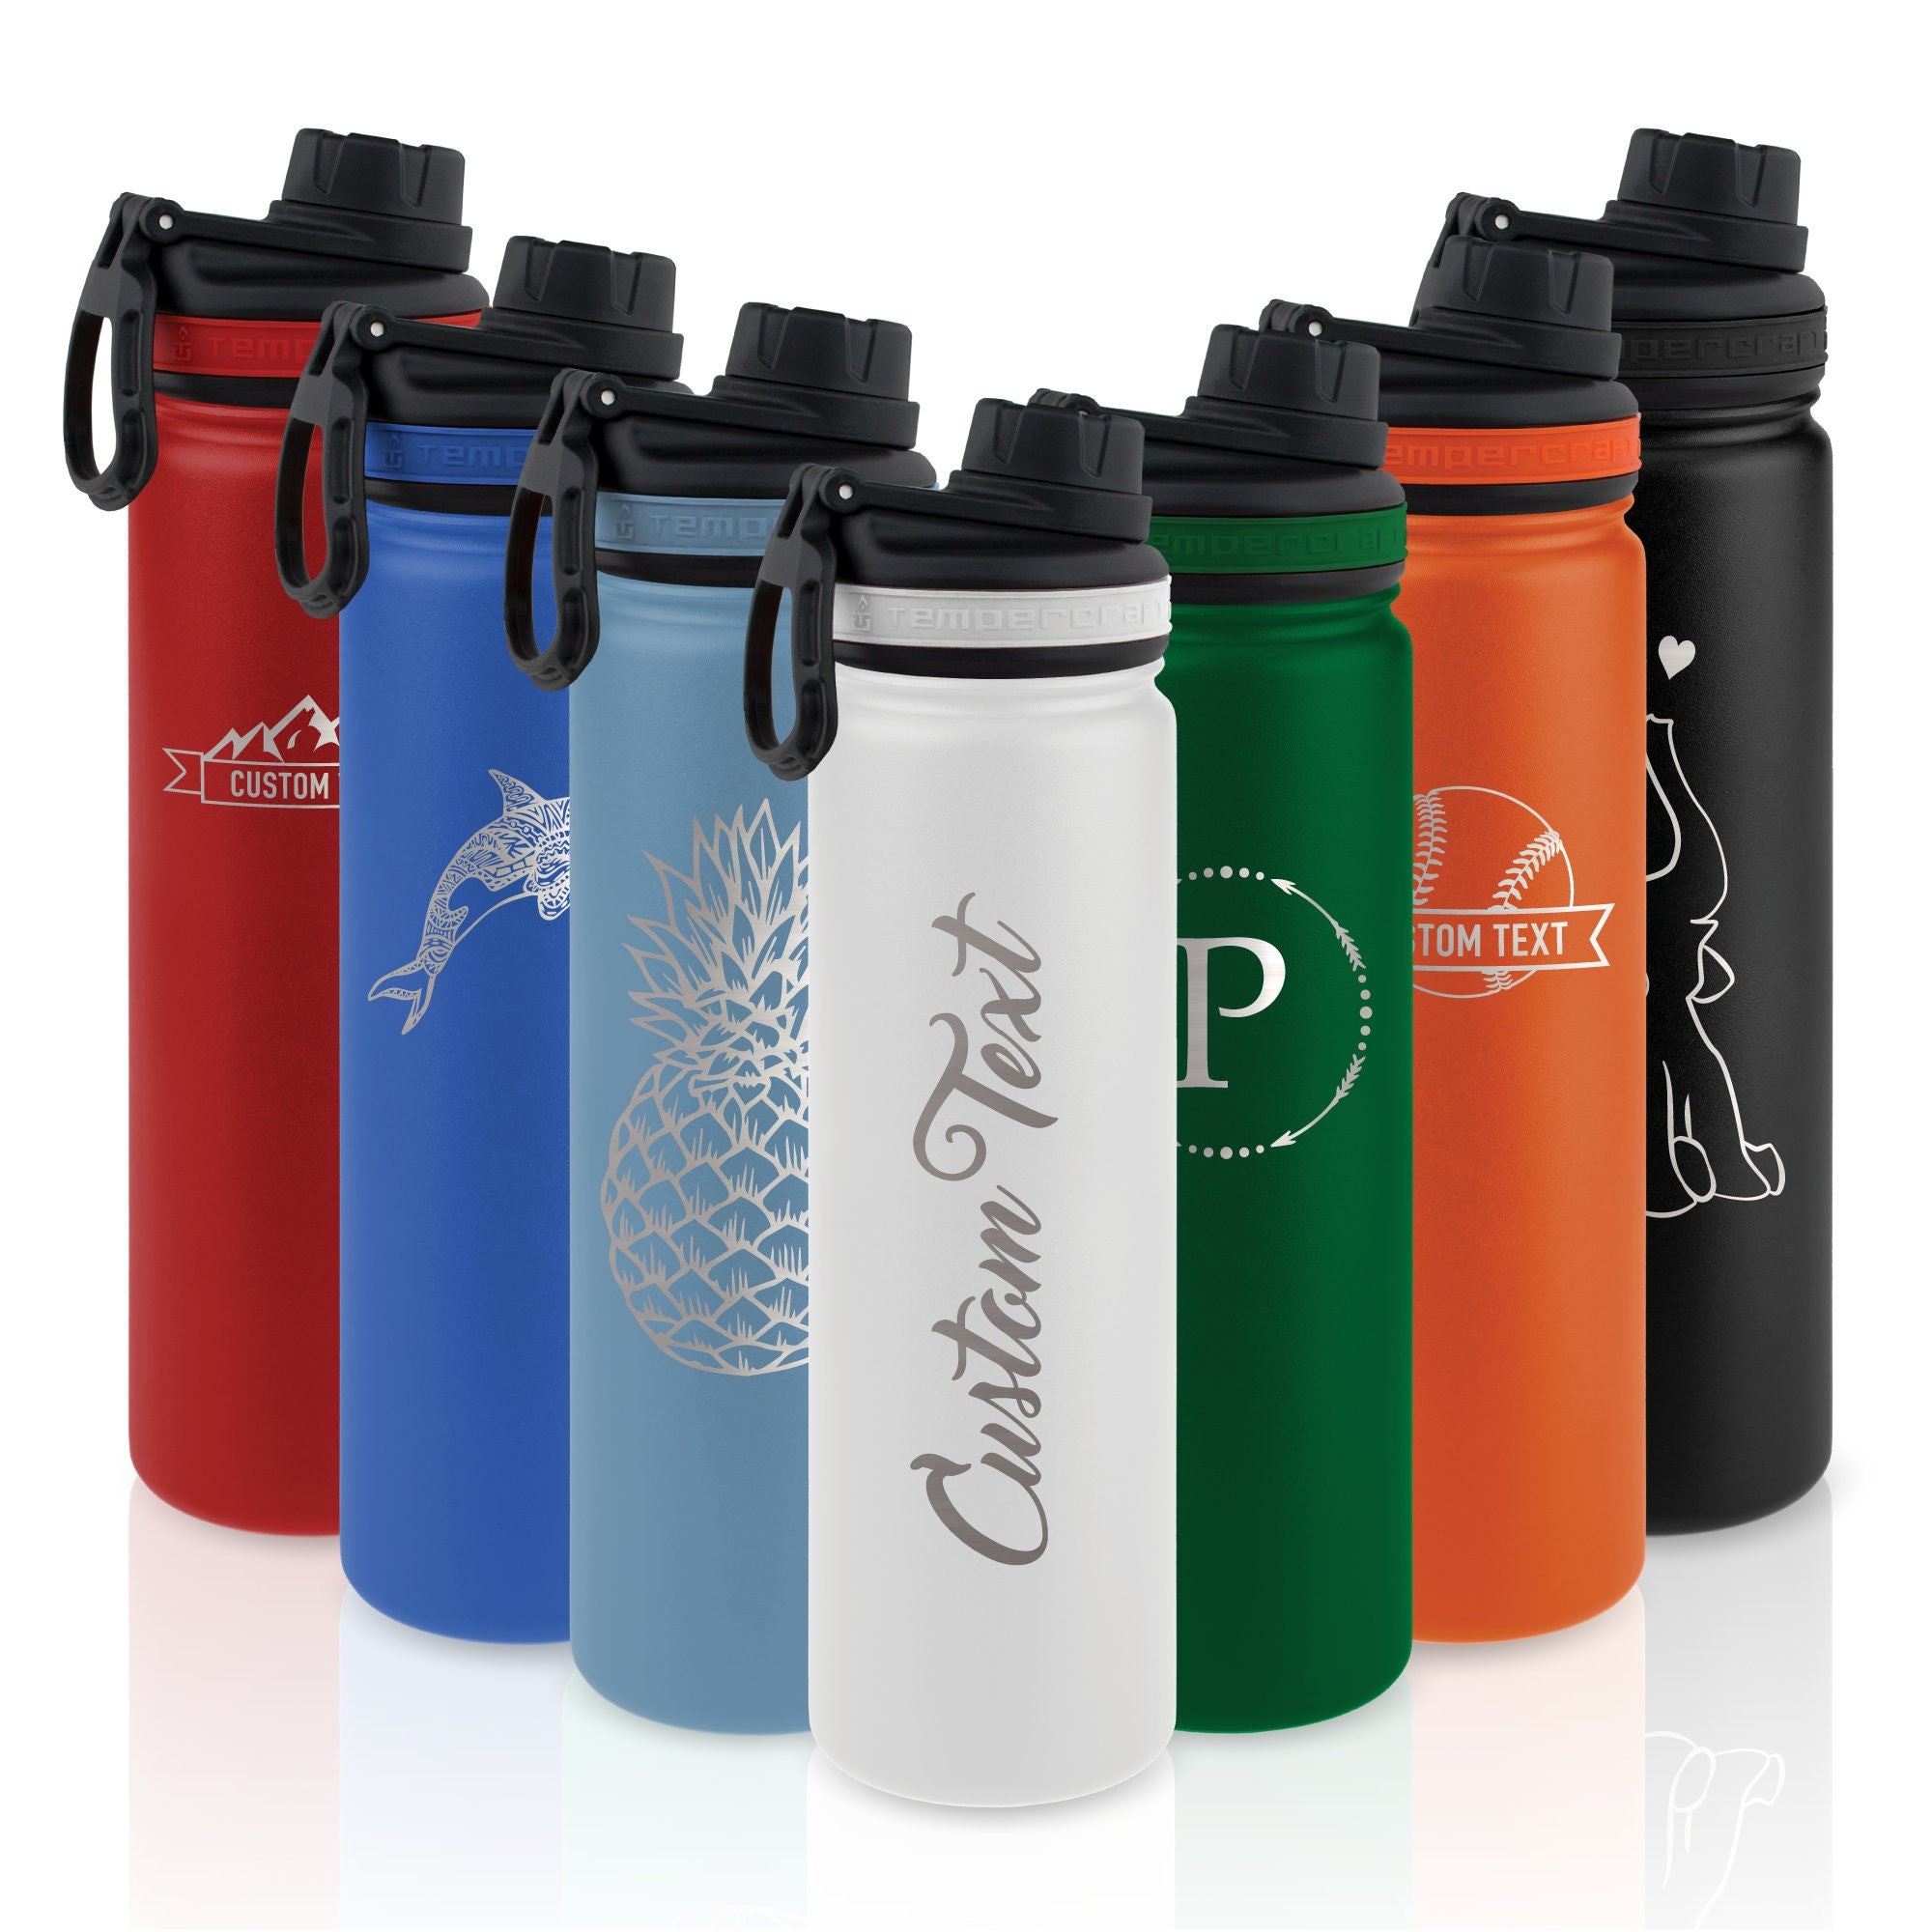 The COLDEST Handle water Bottle is here! Explore the 10+ ways we